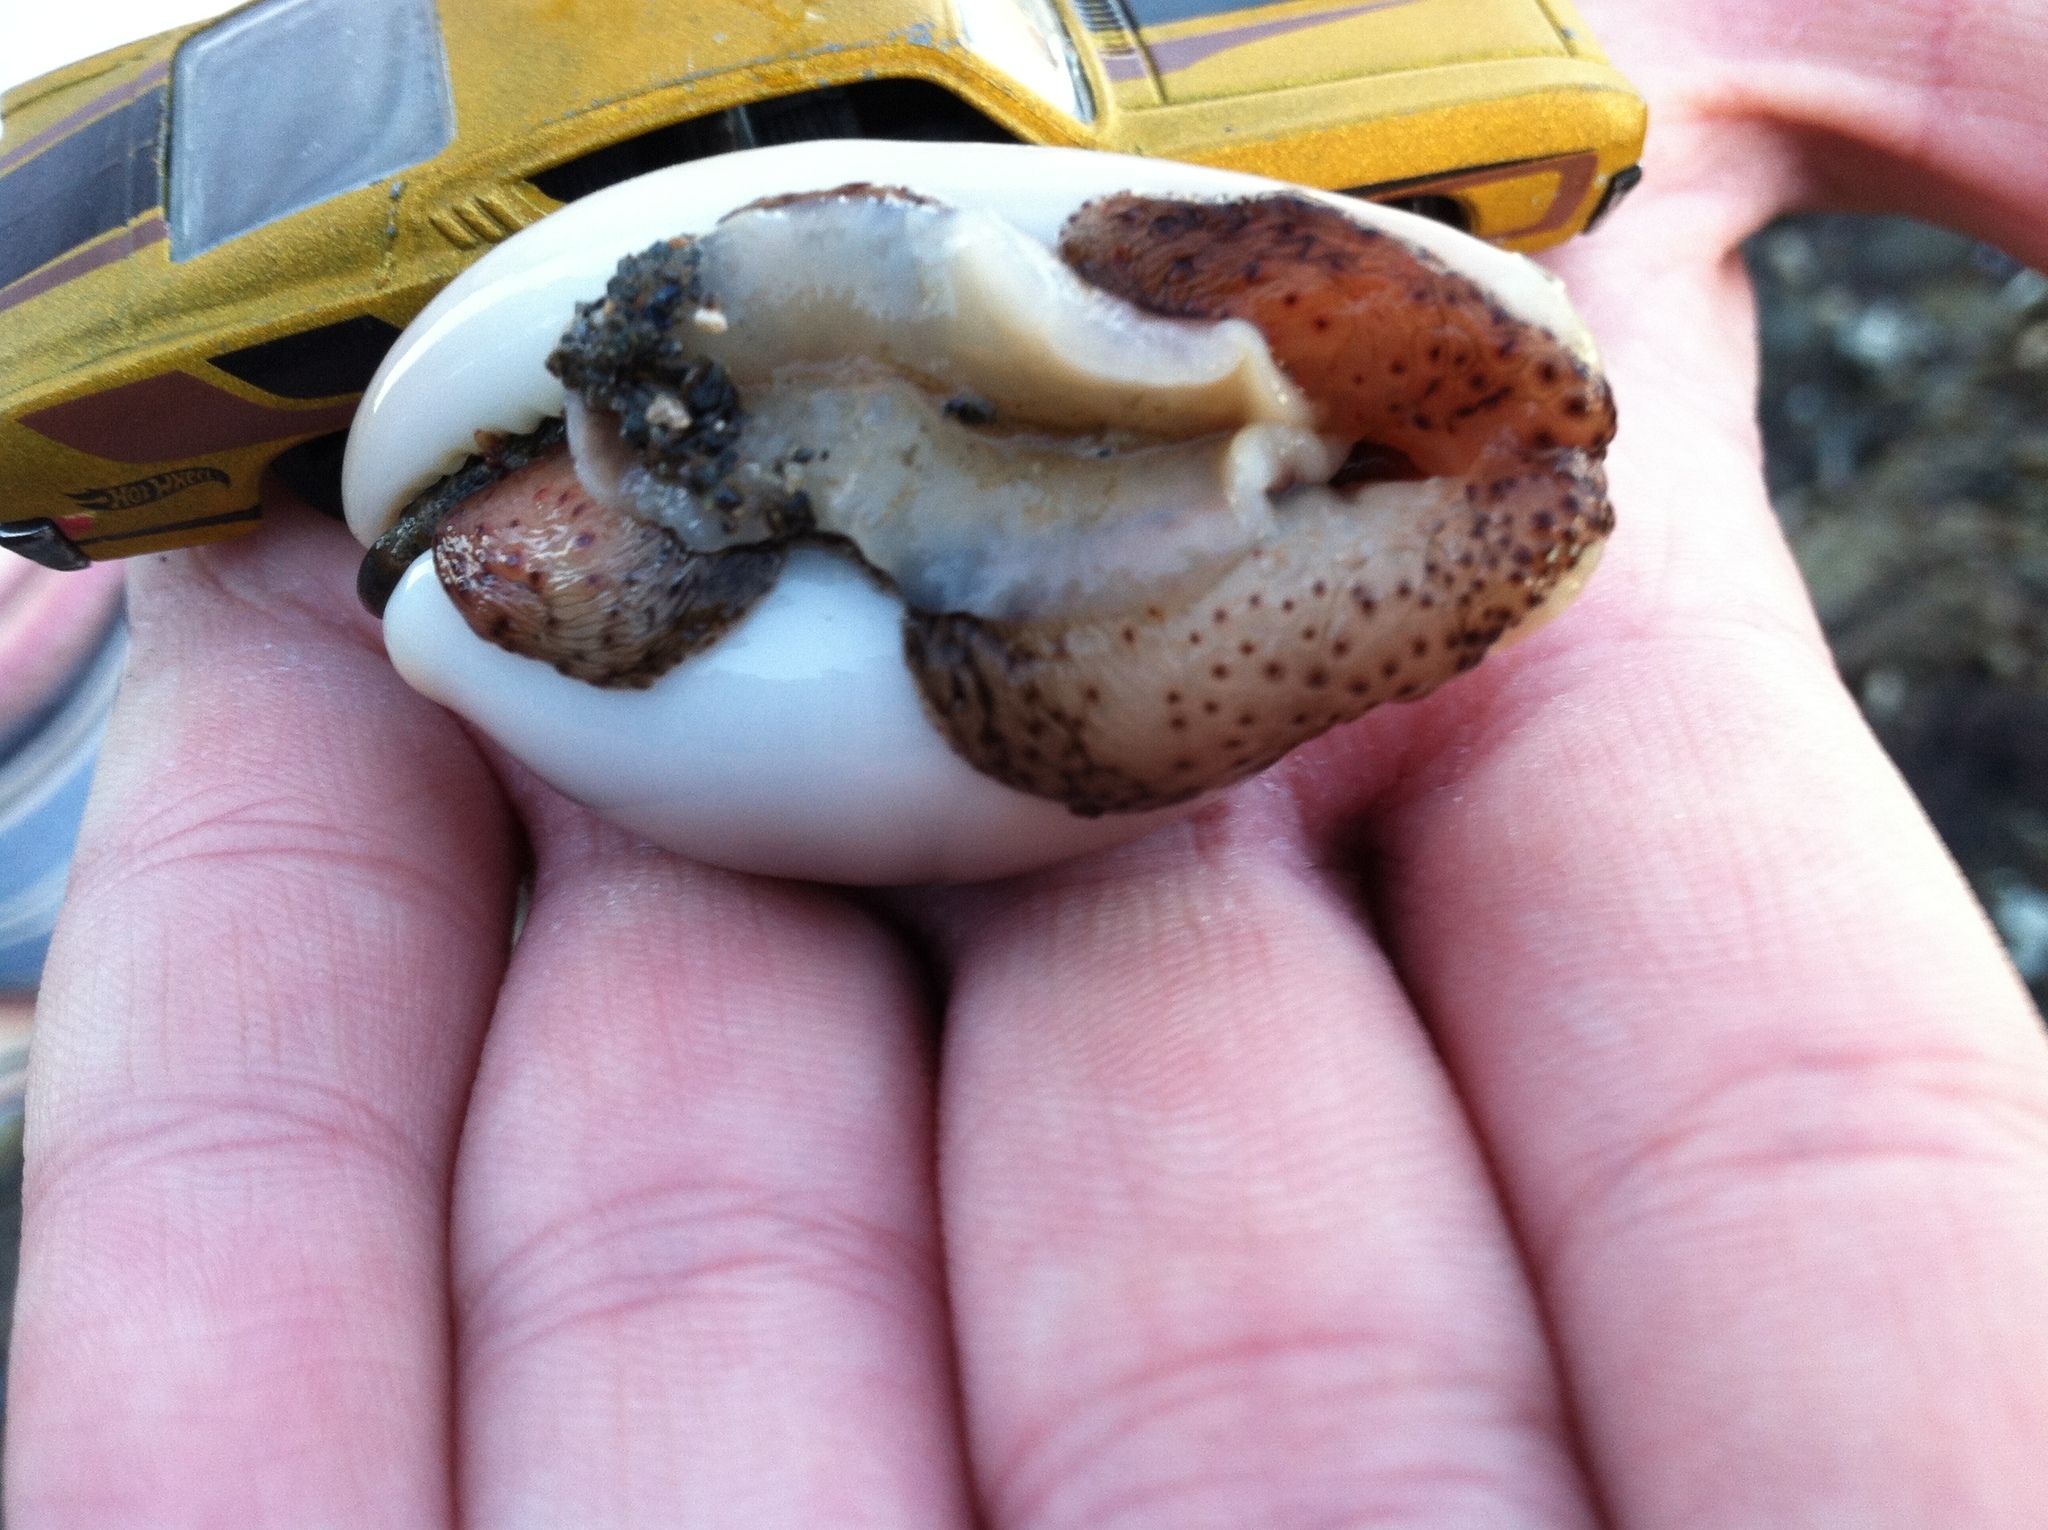 Image of chestnut cowrie